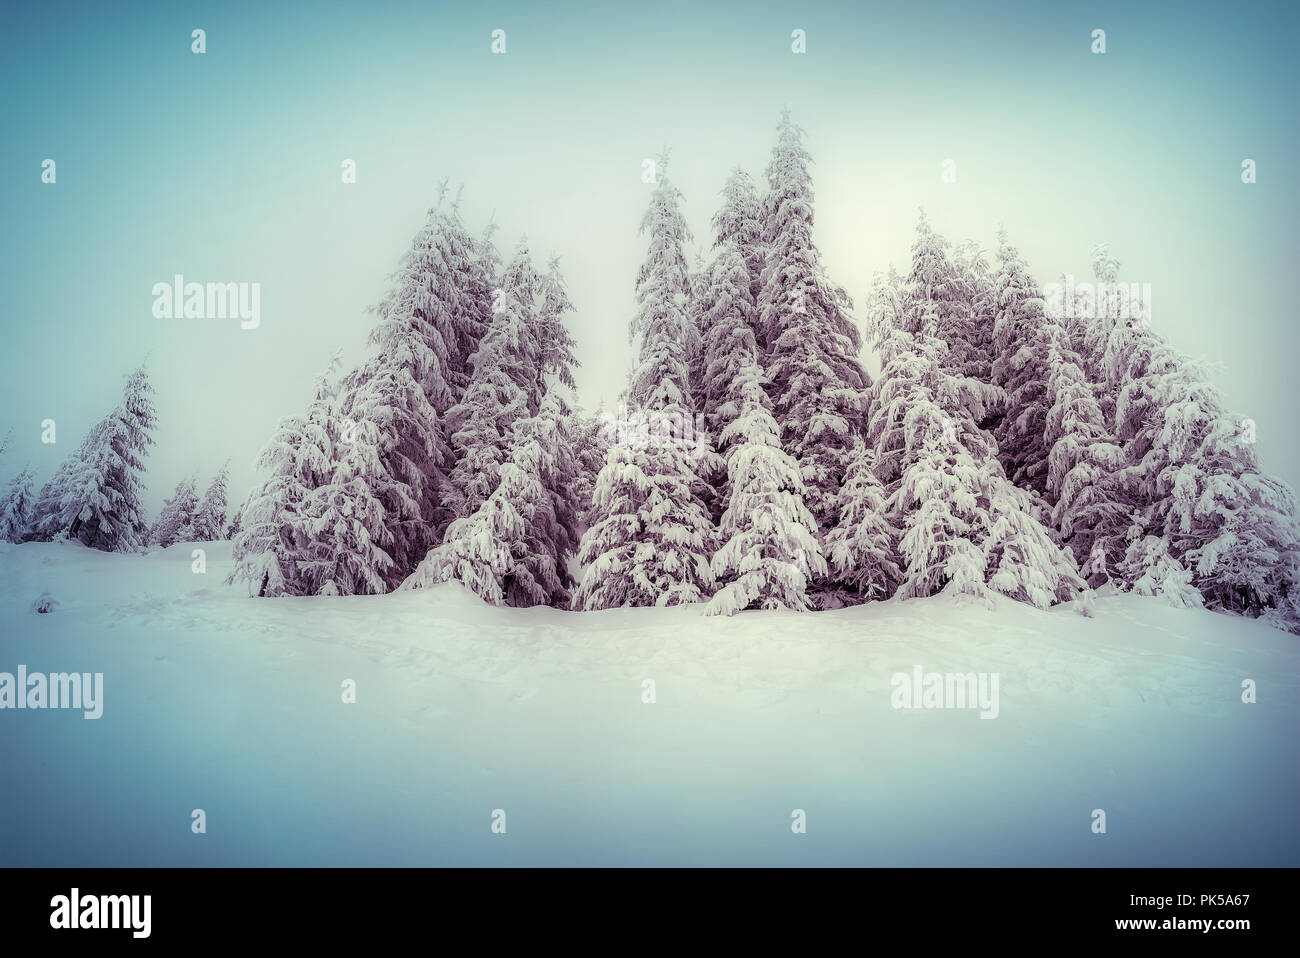 Foggy winter scene in the mountain forest. Retro style. Stock Photo